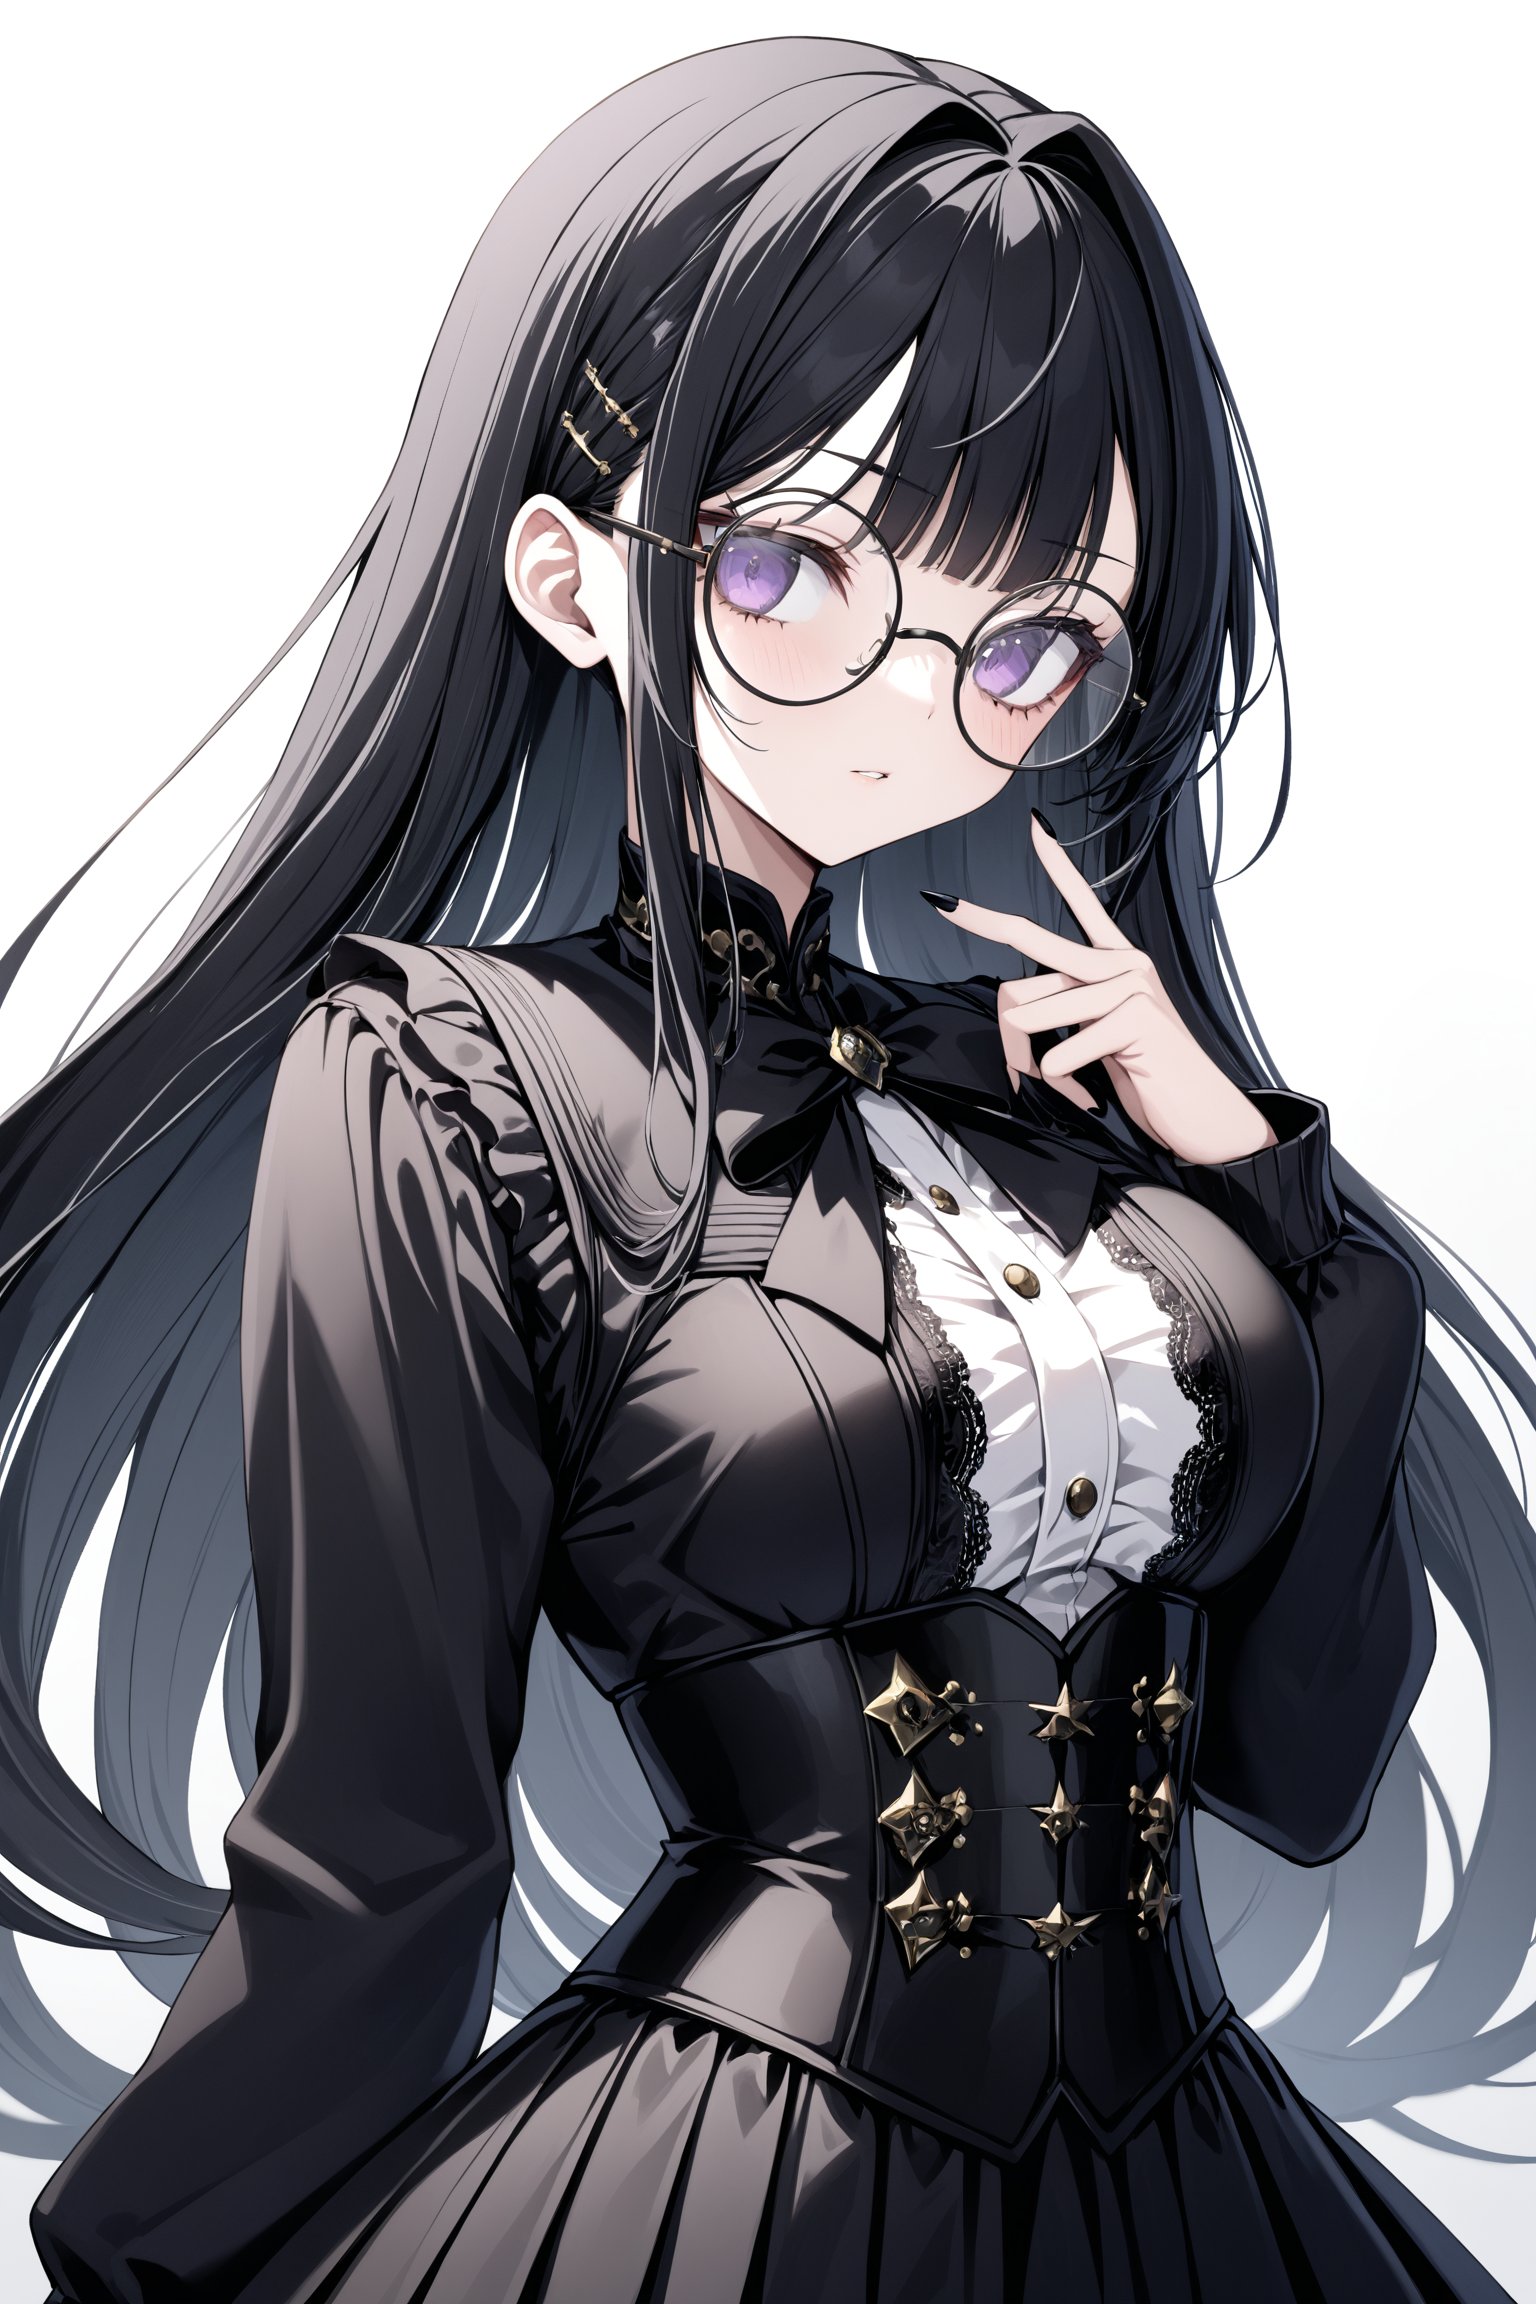 1 girl, black hair, hime cut,blunt bangs,(hair intakes),
 ((wearing large round glasses)), and a Gothic-style sailor uniform,The uniform features dark colors, lace accents, and a corset-like bodice, blending traditional and alternative fashion elements. Her look is both elegant and edgy,akebi komichi,anime